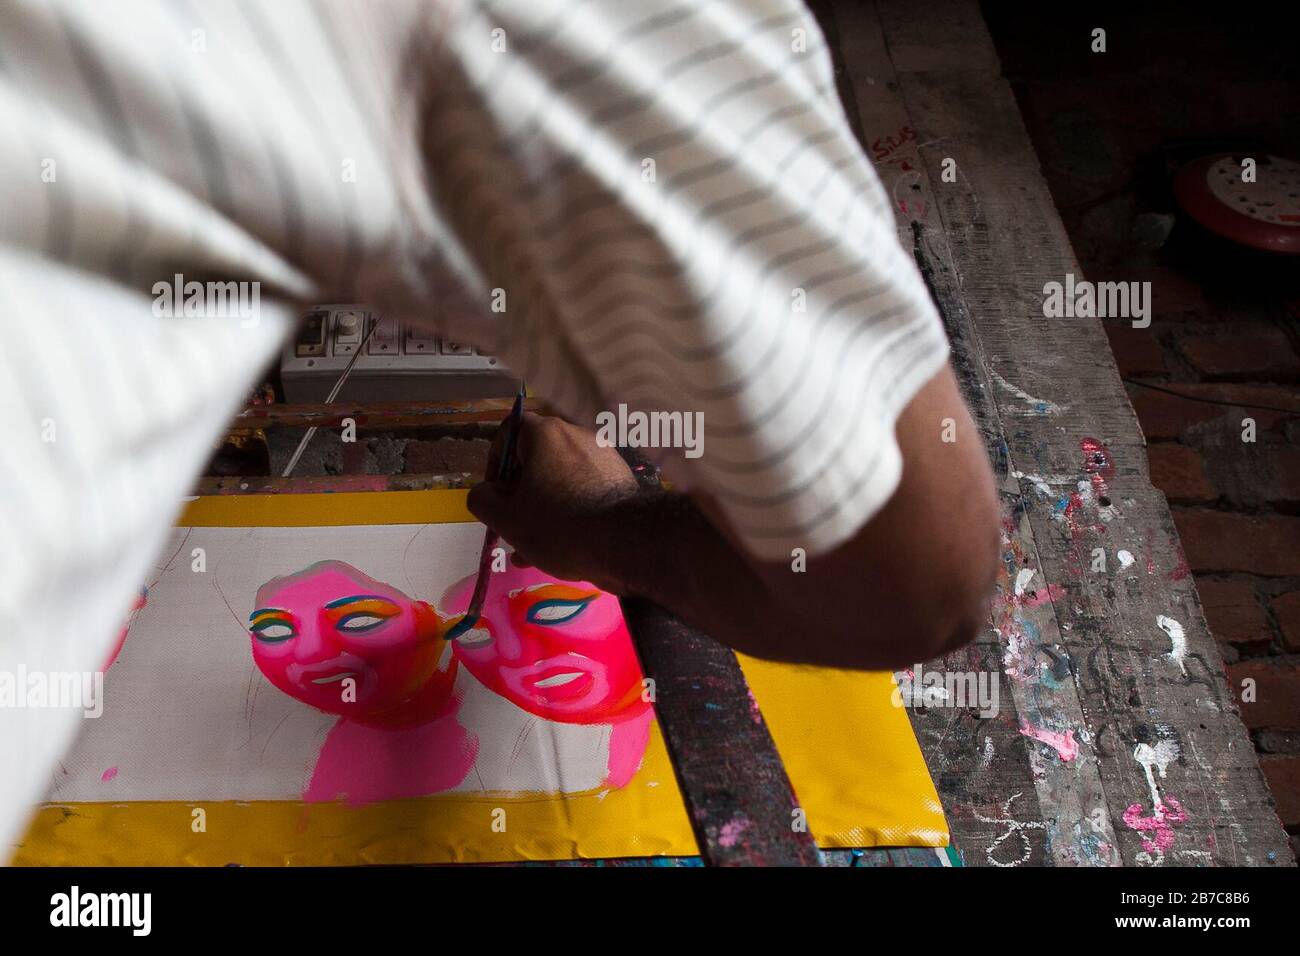 Proshanto Kumar Das, son of Raj Kumar Das, best known as RK Das, one of the first generation rickshaw artists in Bangladesh, is busy in painting a rickshaw art at his studio in capital Dhaka, on May 3, 2012. The rickshaw art is a form of pop art that depicts our urban culture and folklore of Bangladesh. Rickshaws were first introduced in Bangladesh in the 1930s from Japan, where the three-wheeled vehicles were known as 'nintaku'. The idea of decorating the leg-powered contraptions took off in Bangladesh the 1950s with the tradition following the simple yet colourful style then used by painters Stock Photo